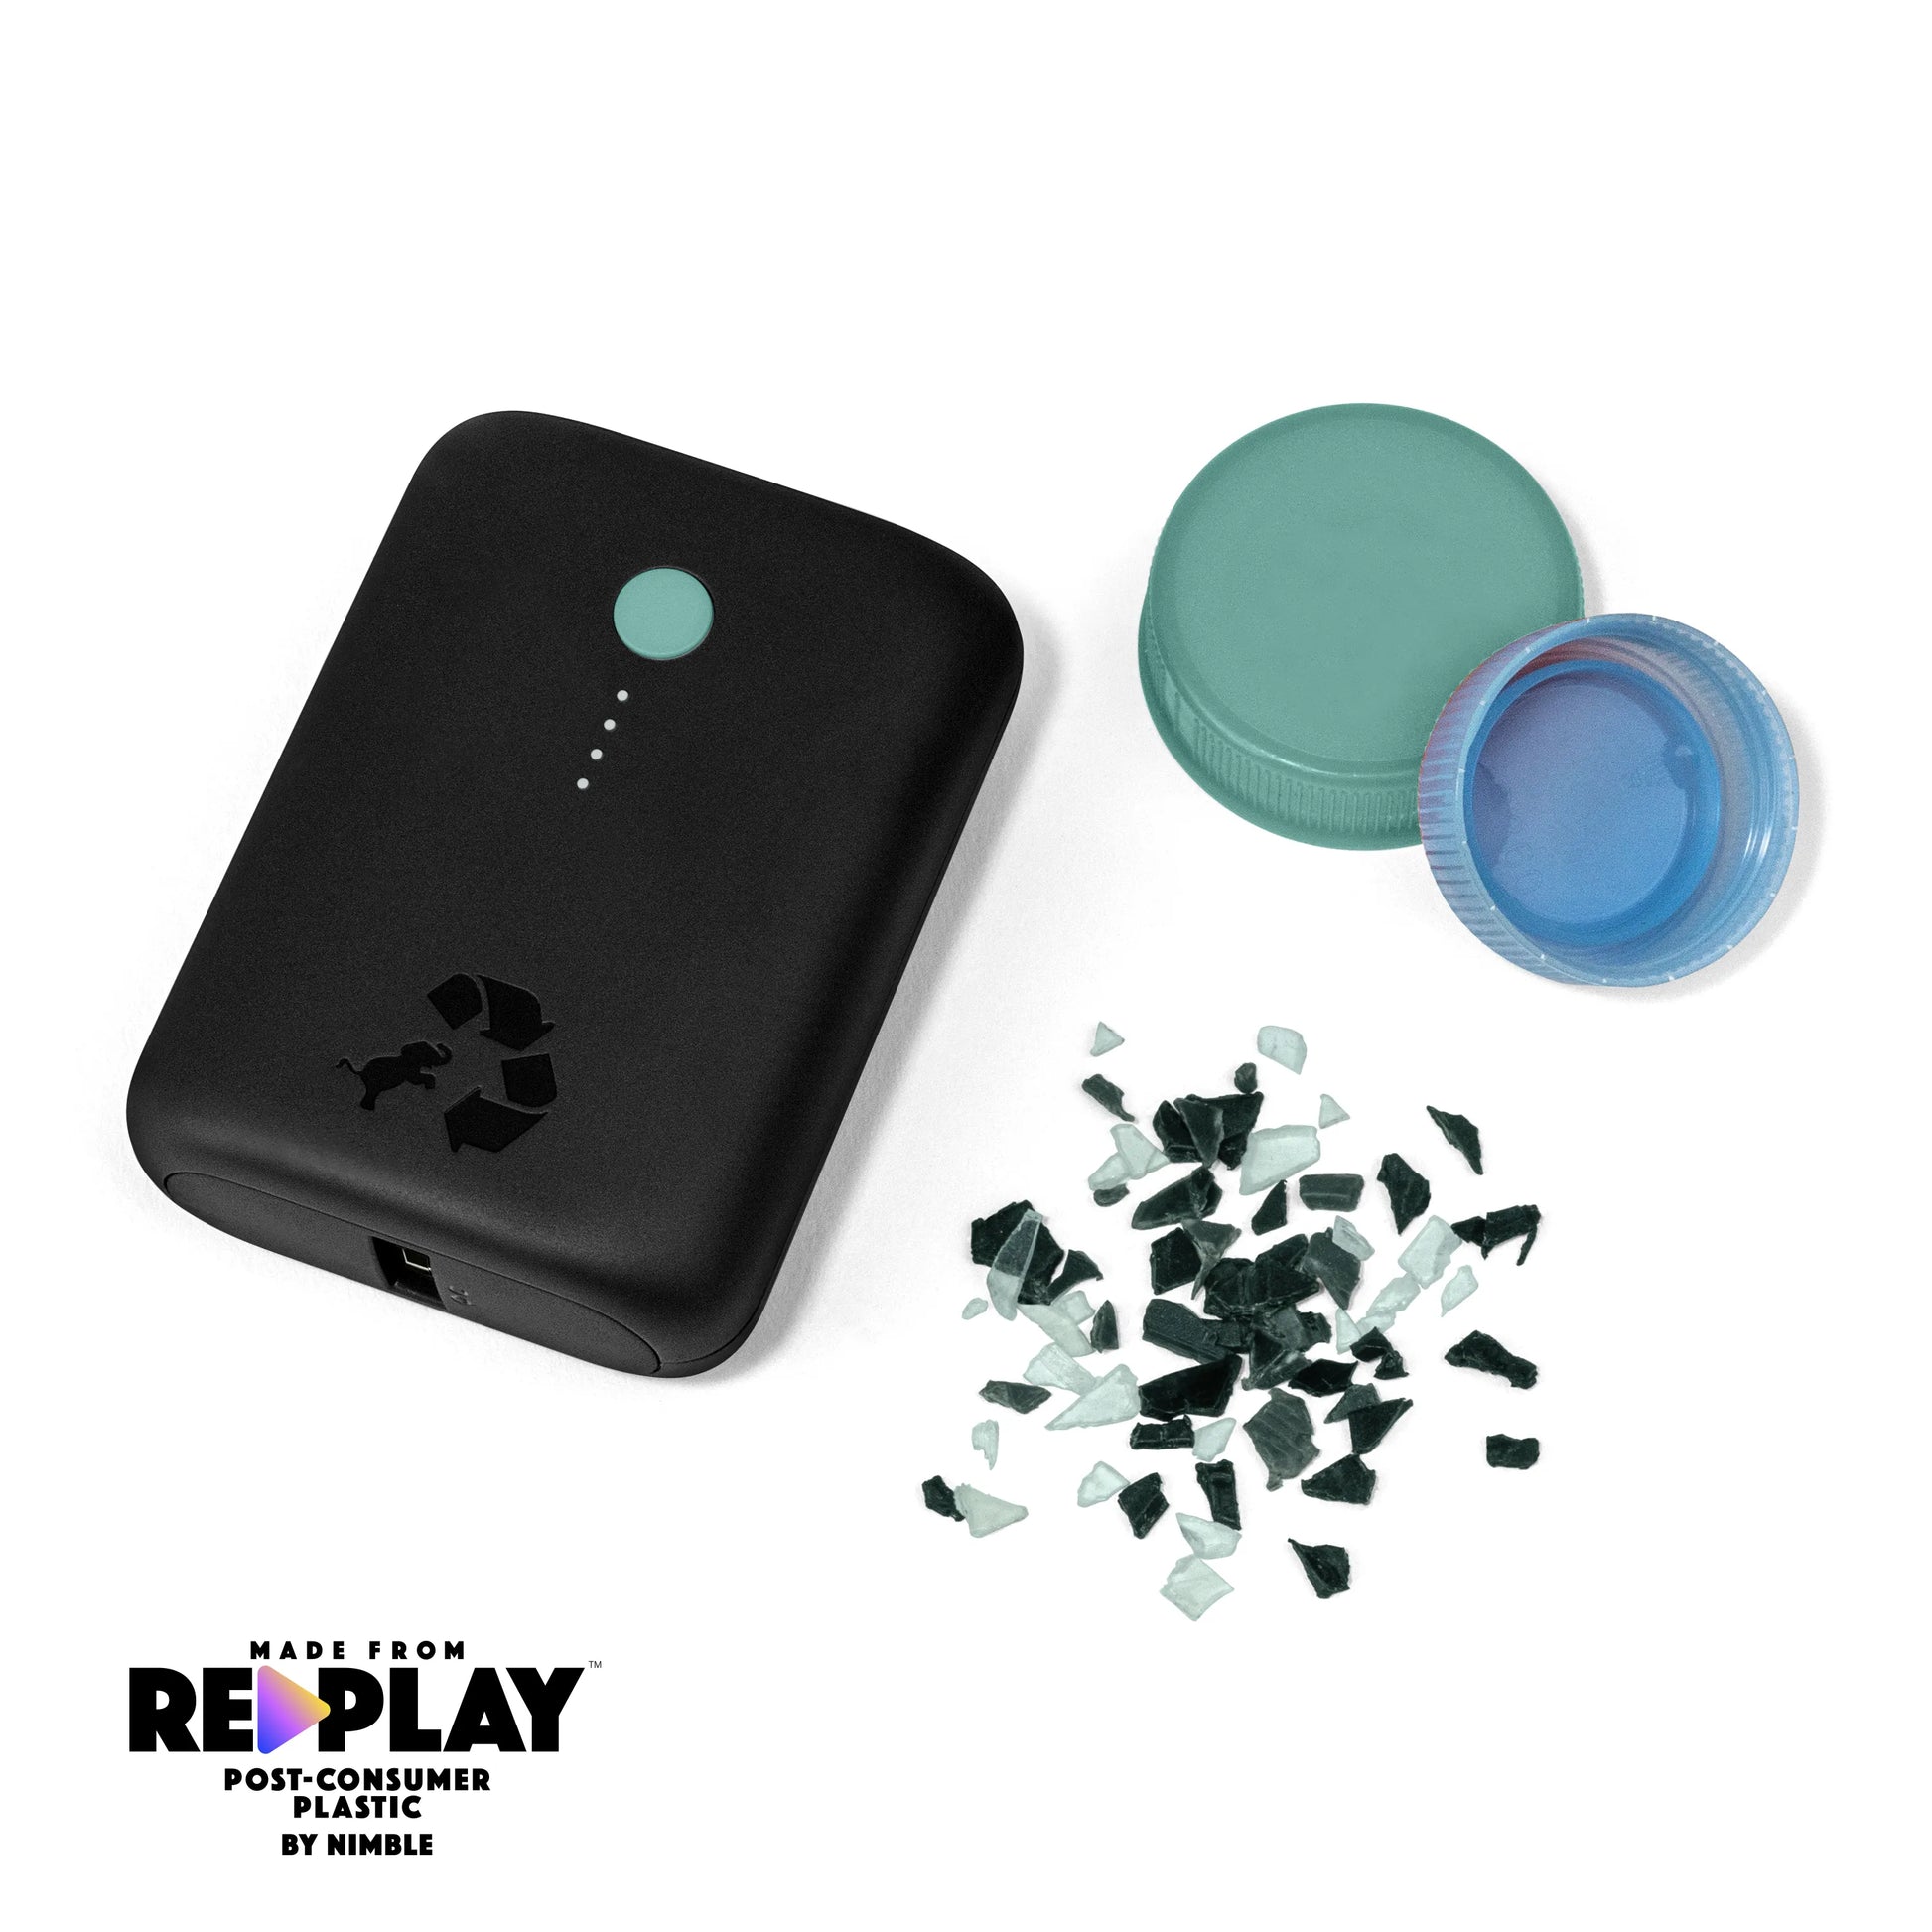 Black portable charger with green button next to bottle caps and shredded plastic.